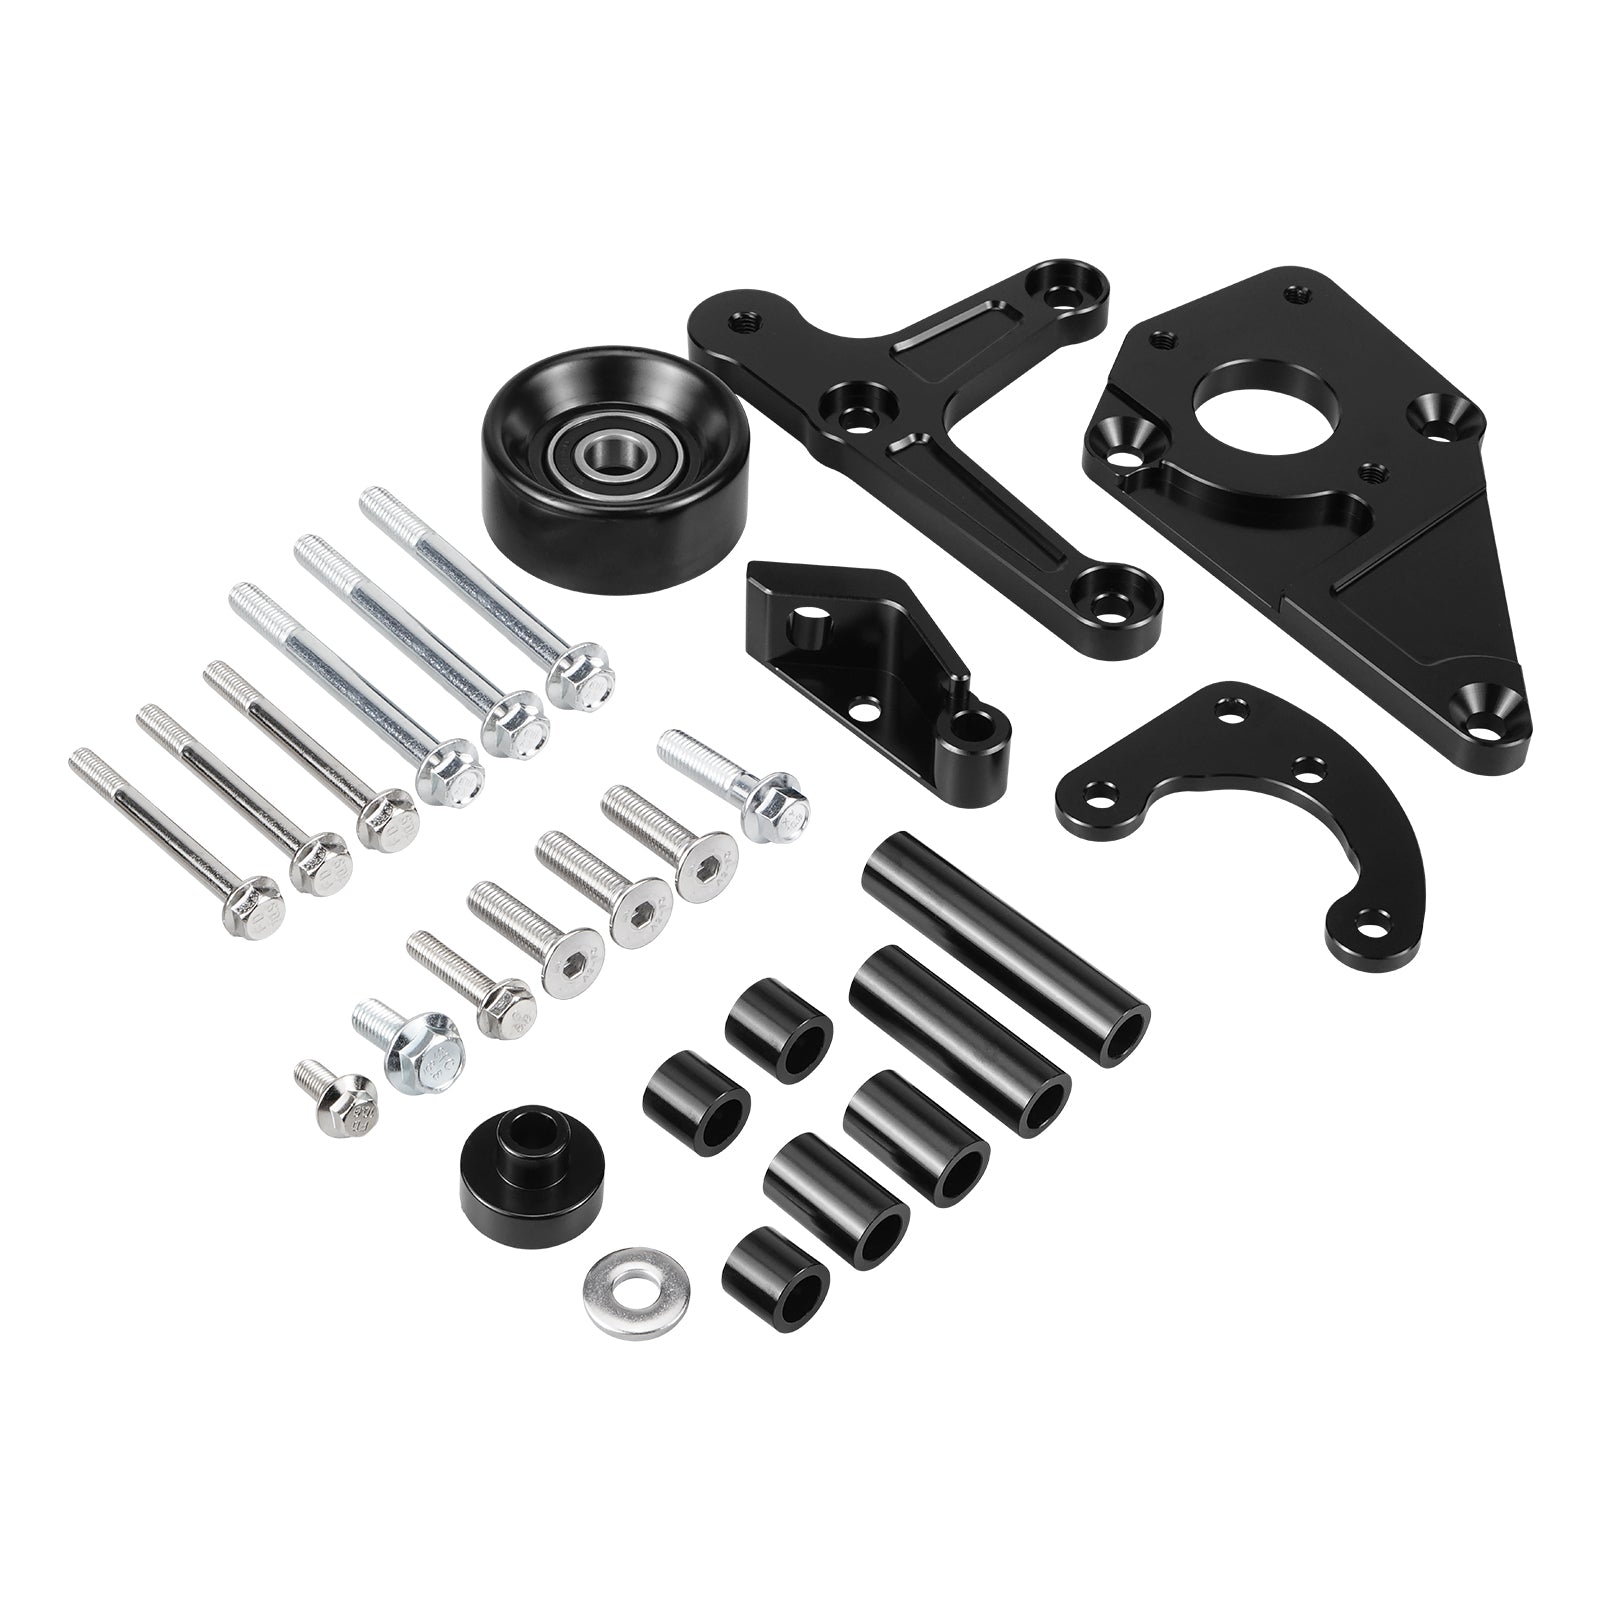 BEVINSEE For LS1 Low Mount Alternator and Power Steering Relocation Bracket Kit For Camaro